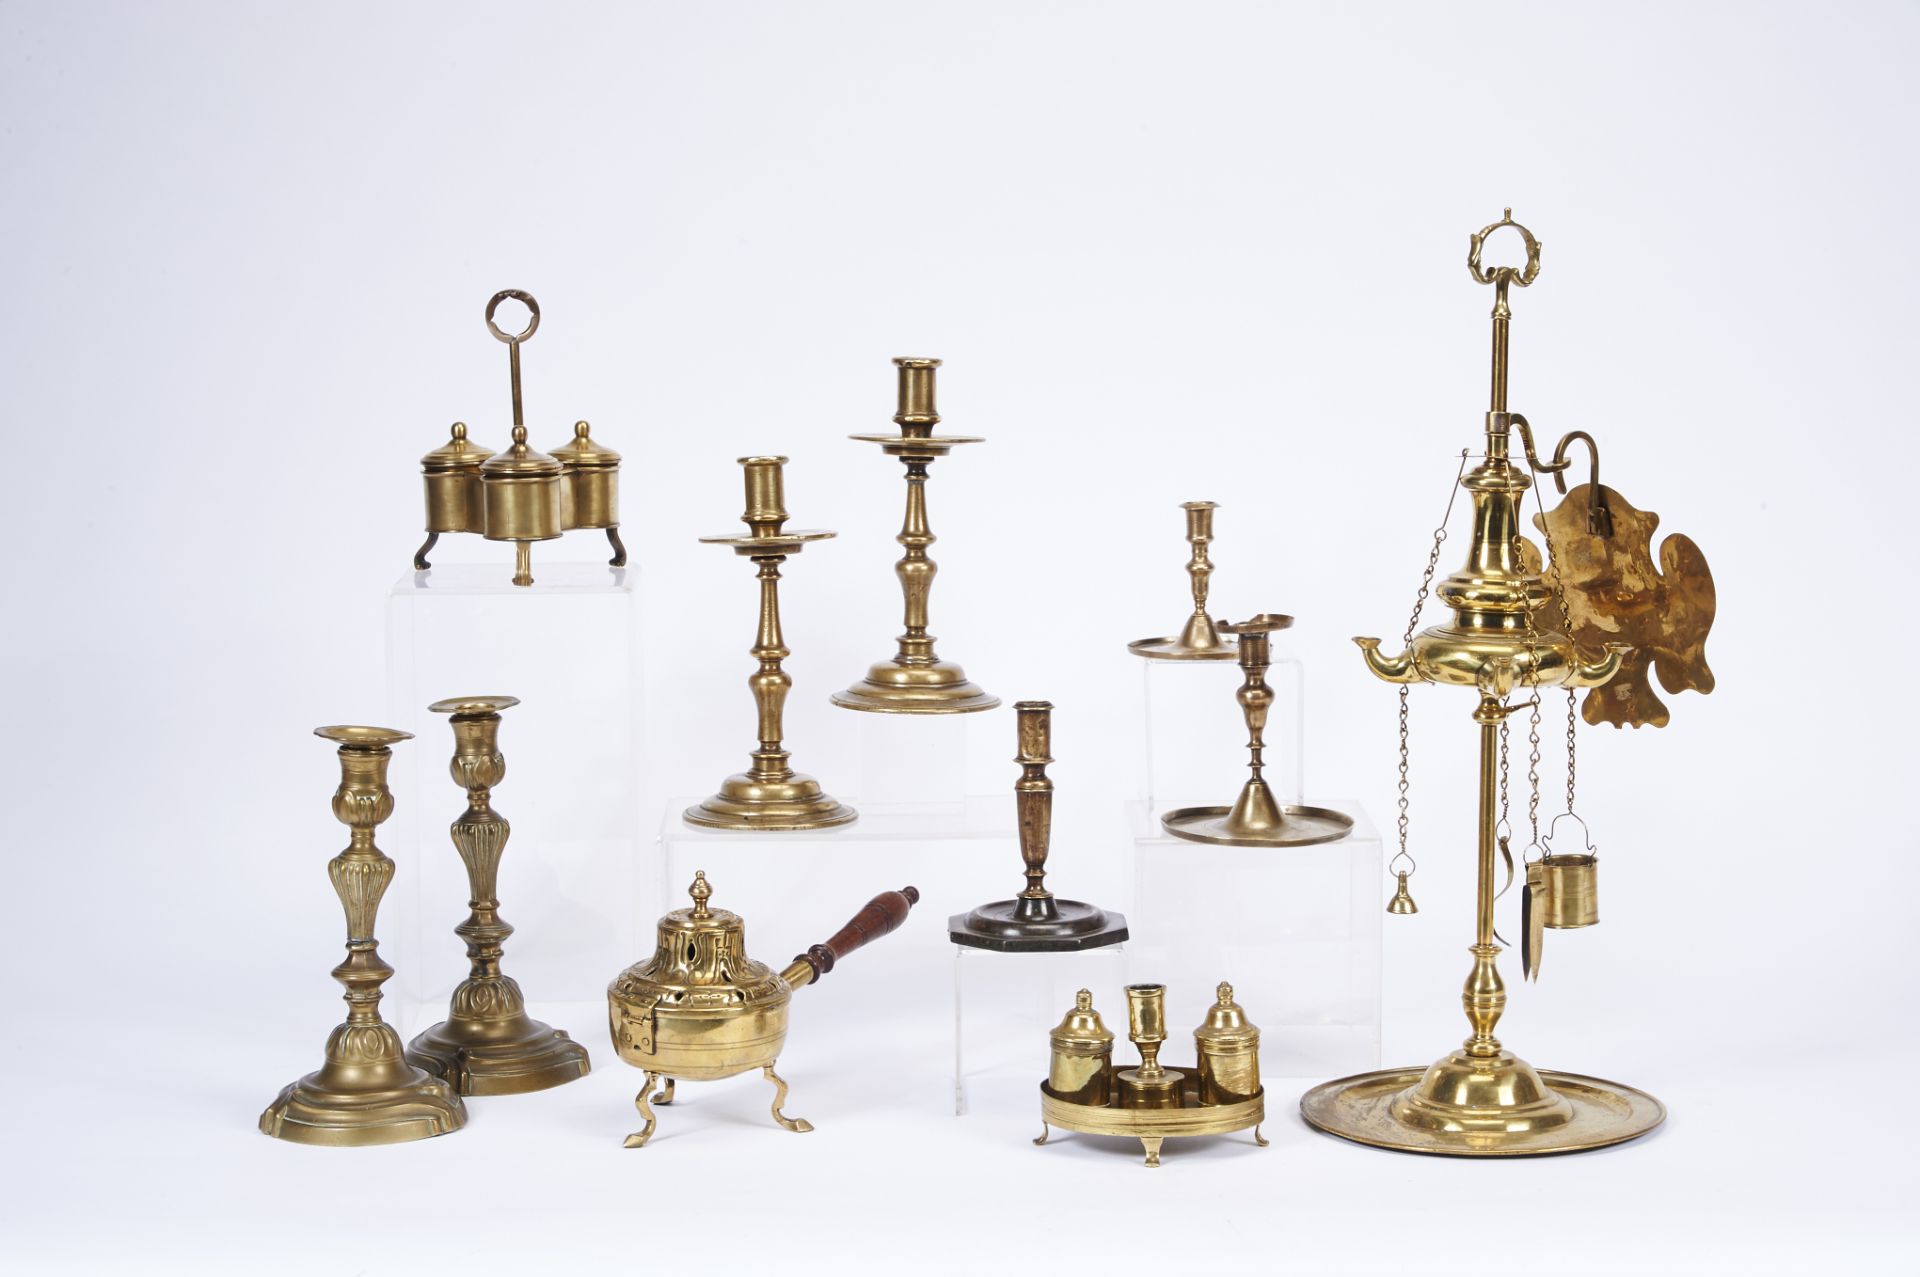 A pair of candlesticks, mannerist, bronze, turned stems, Portuguese, 17th C., signs of use, small